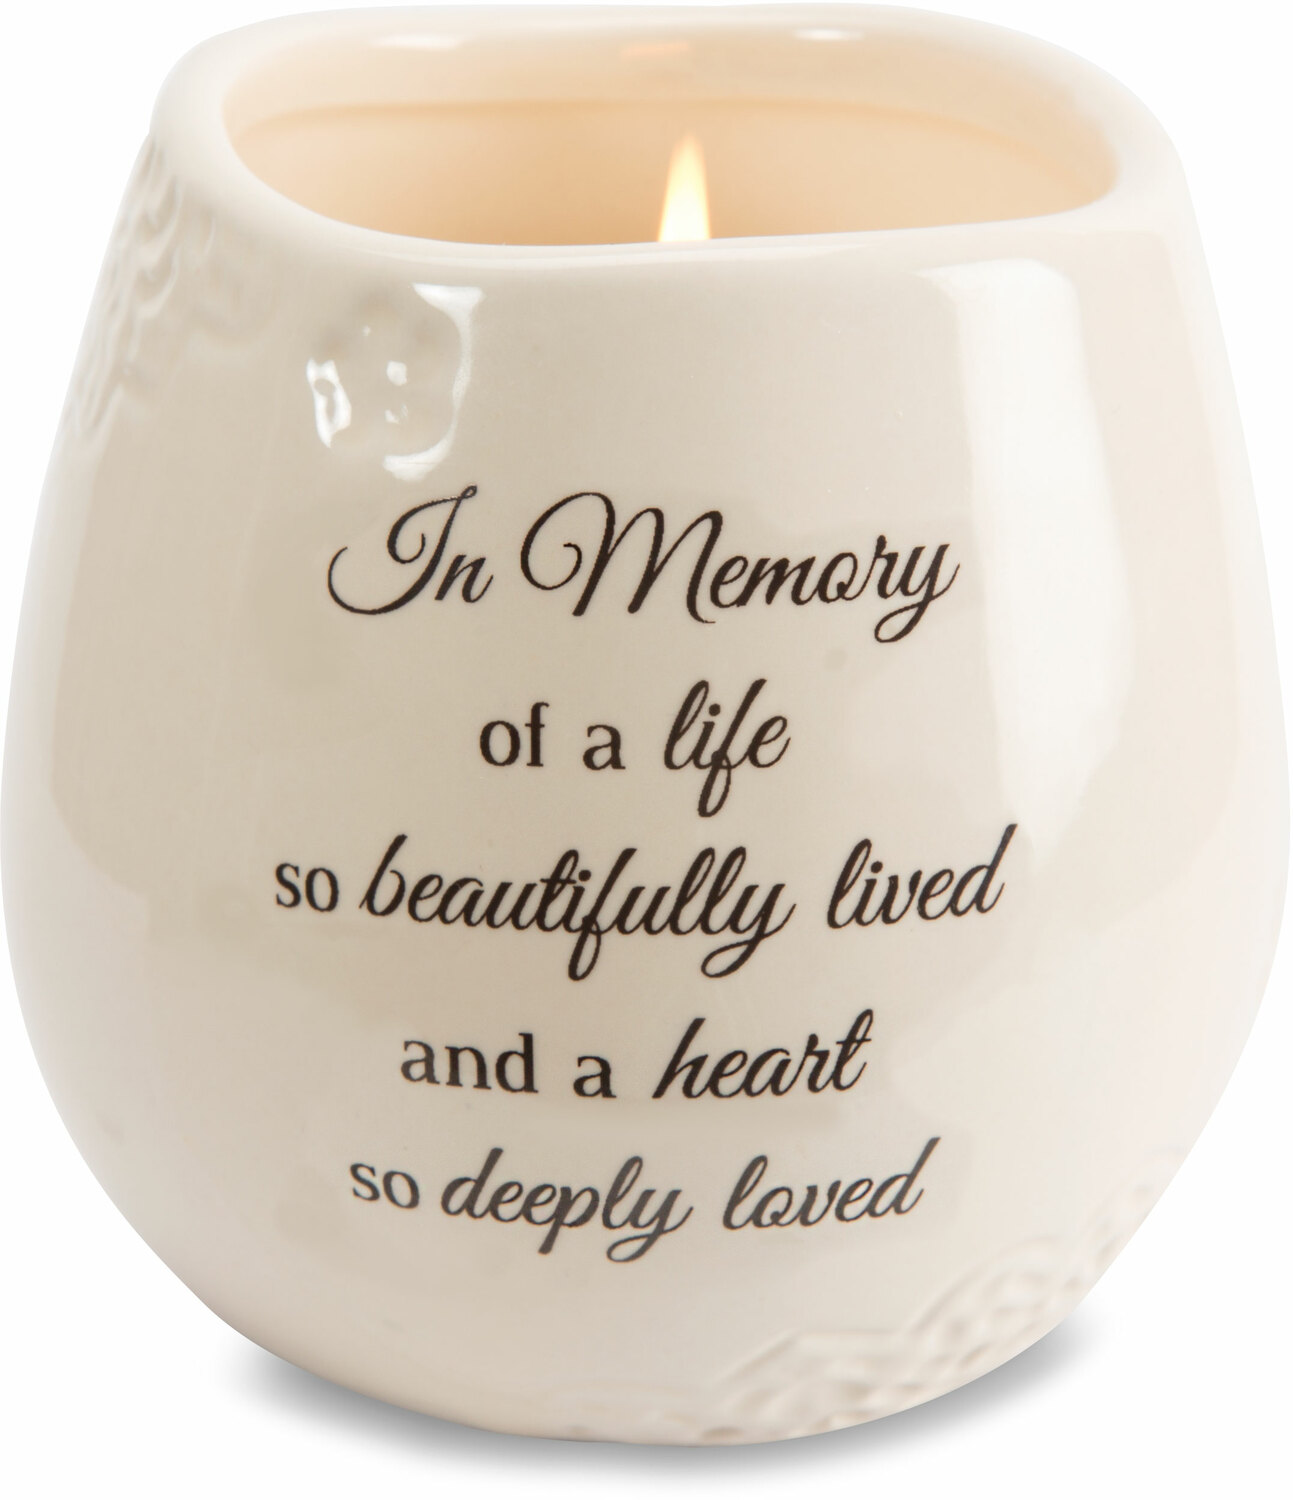 Memory by Light Your Way Memorial - Memory - 8 oz - 100% Soy Wax Candle
Scent: Tranquility